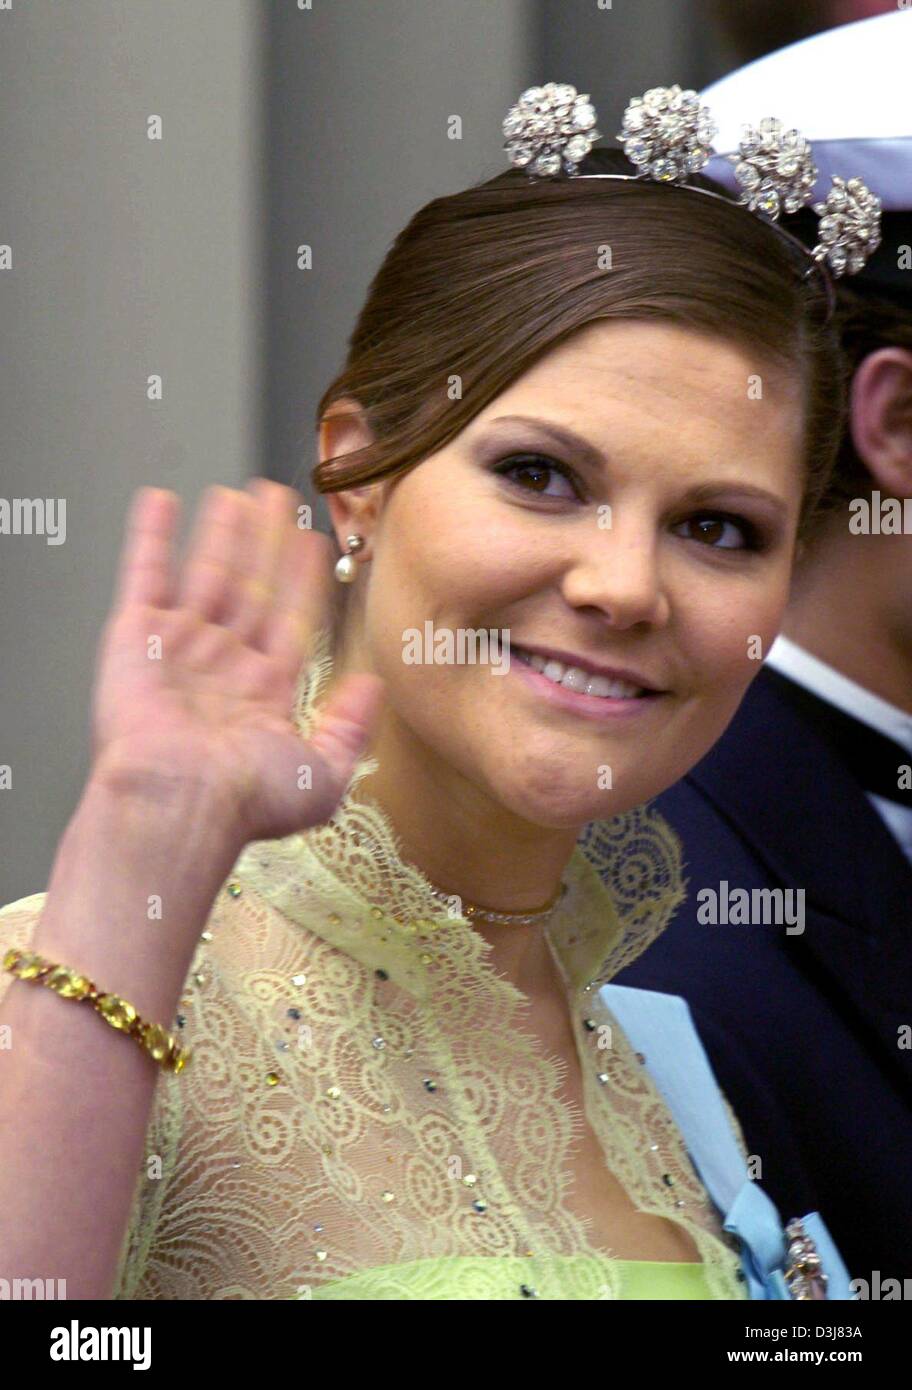 (dpa) - Crown princess Victoria of Sweden smiles and waves her hand  on her arrival to the wedding of Danish crown prince Frederik and Mary Donaldson at the cathedral in Copenhagen, Denmark, Friday, 14 May 2004. Members of all European royal dynasties were among the 800 invited guests who attended the wedding. Stock Photo